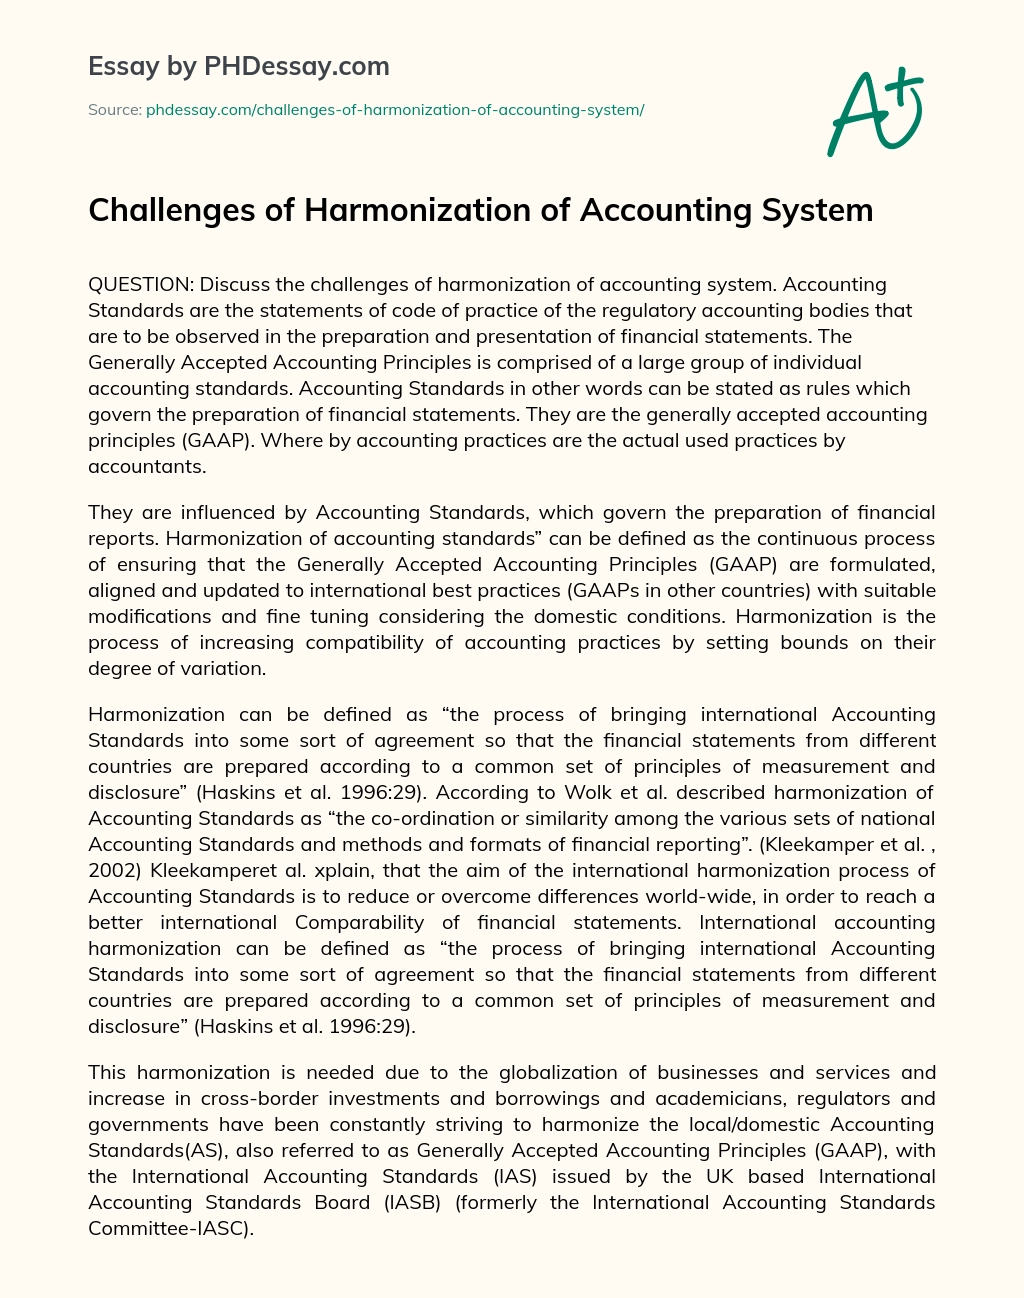 Challenges of Harmonization of Accounting System essay